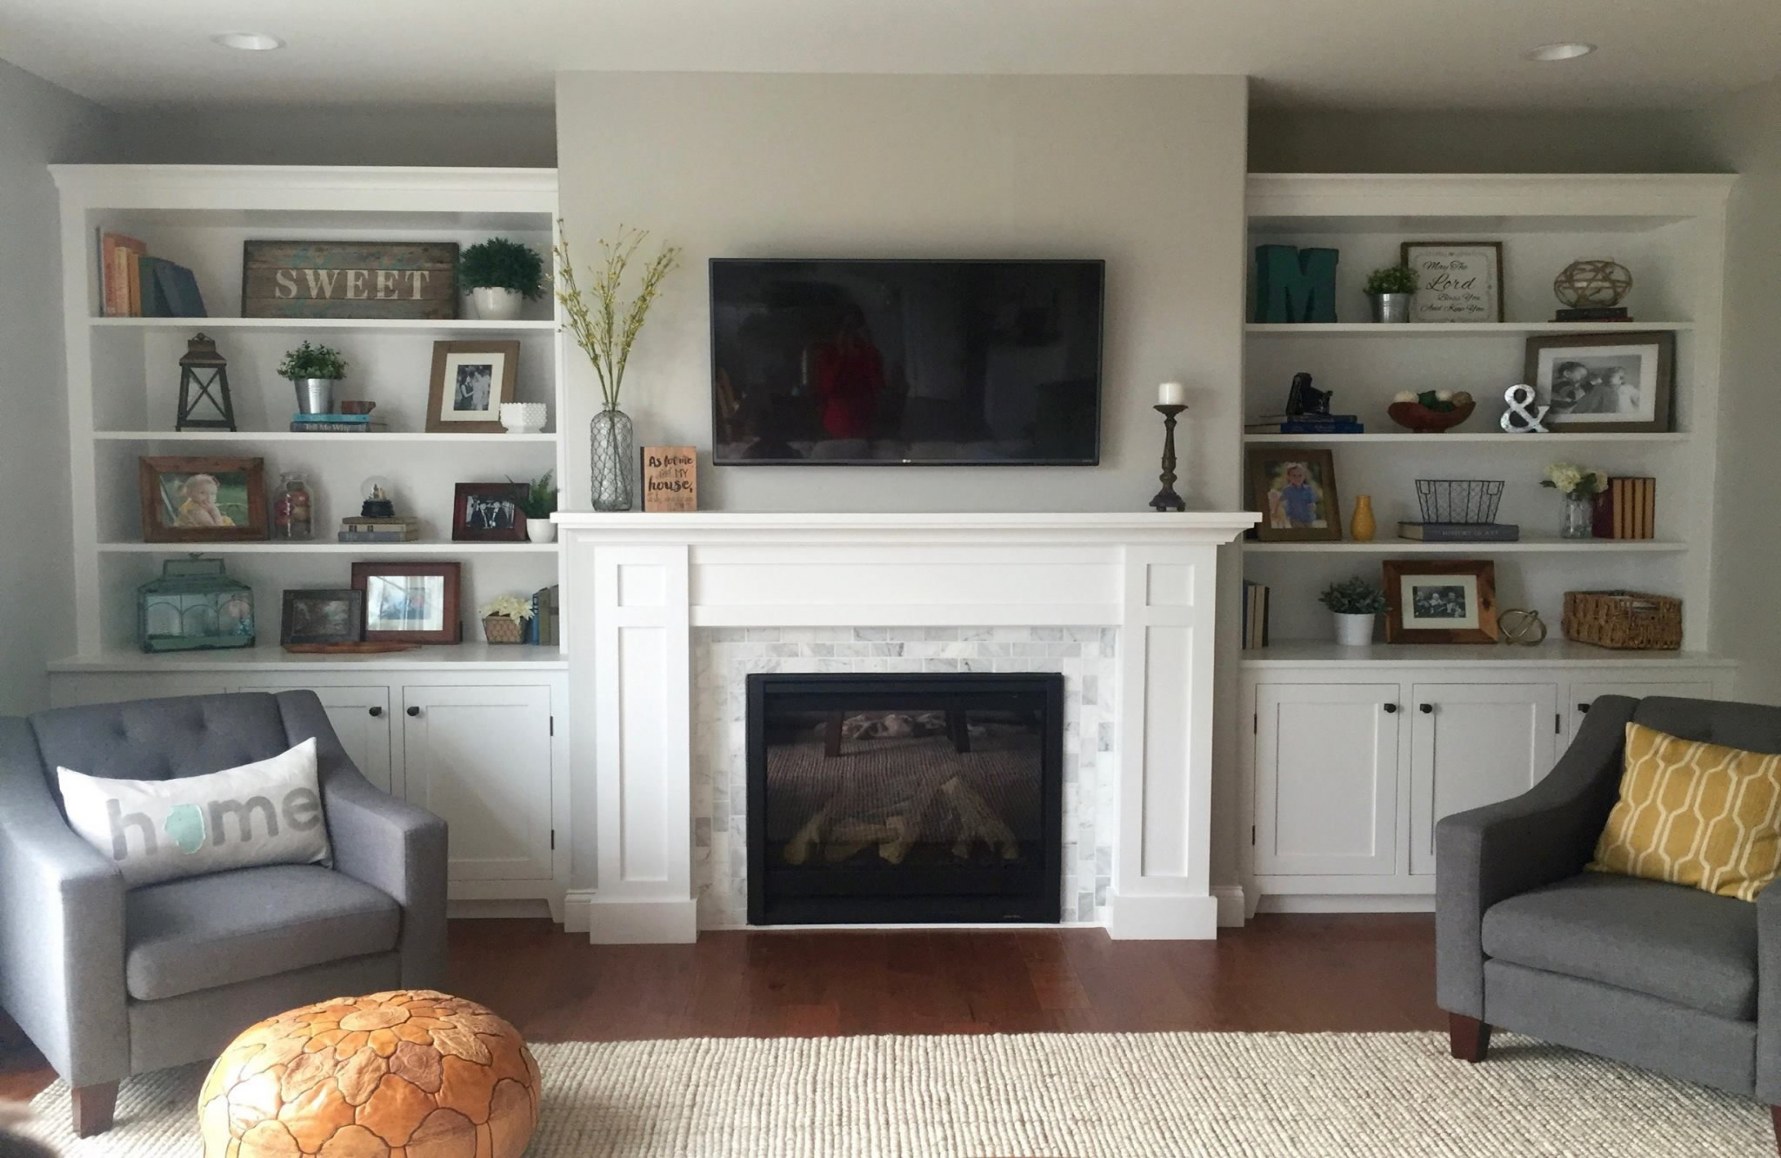 White Rock Fireplace Elegant White Washed Brick Fireplace Fireplace Built In Cabinets